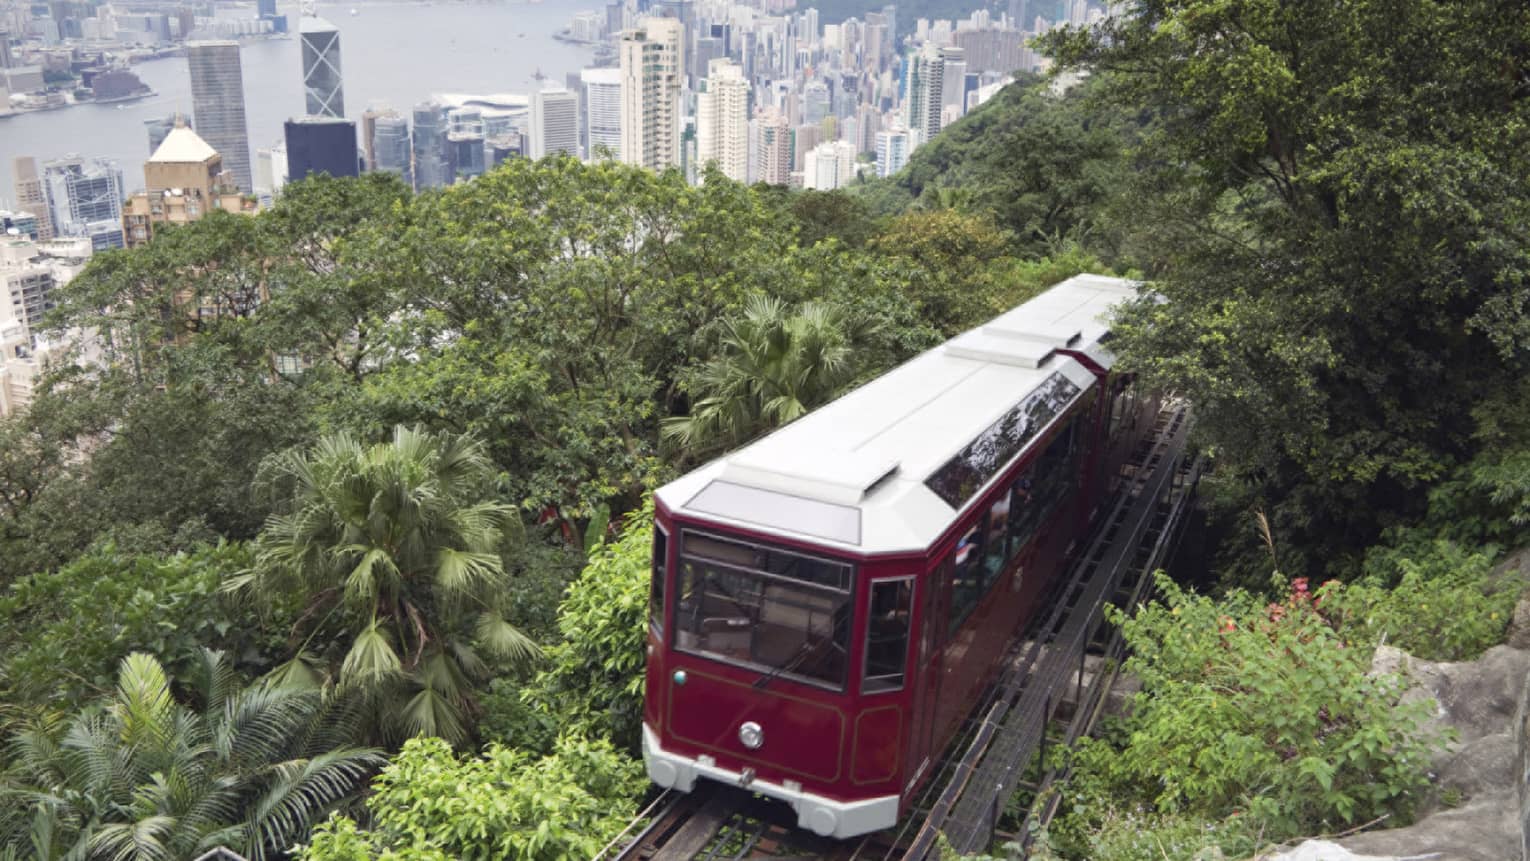 A local cultural experience tour - Peak Explorer, organized by Four Seasons Hotel Hong Kong, with Peak Tram, one of the world's most renowned and oldest funicular railways.